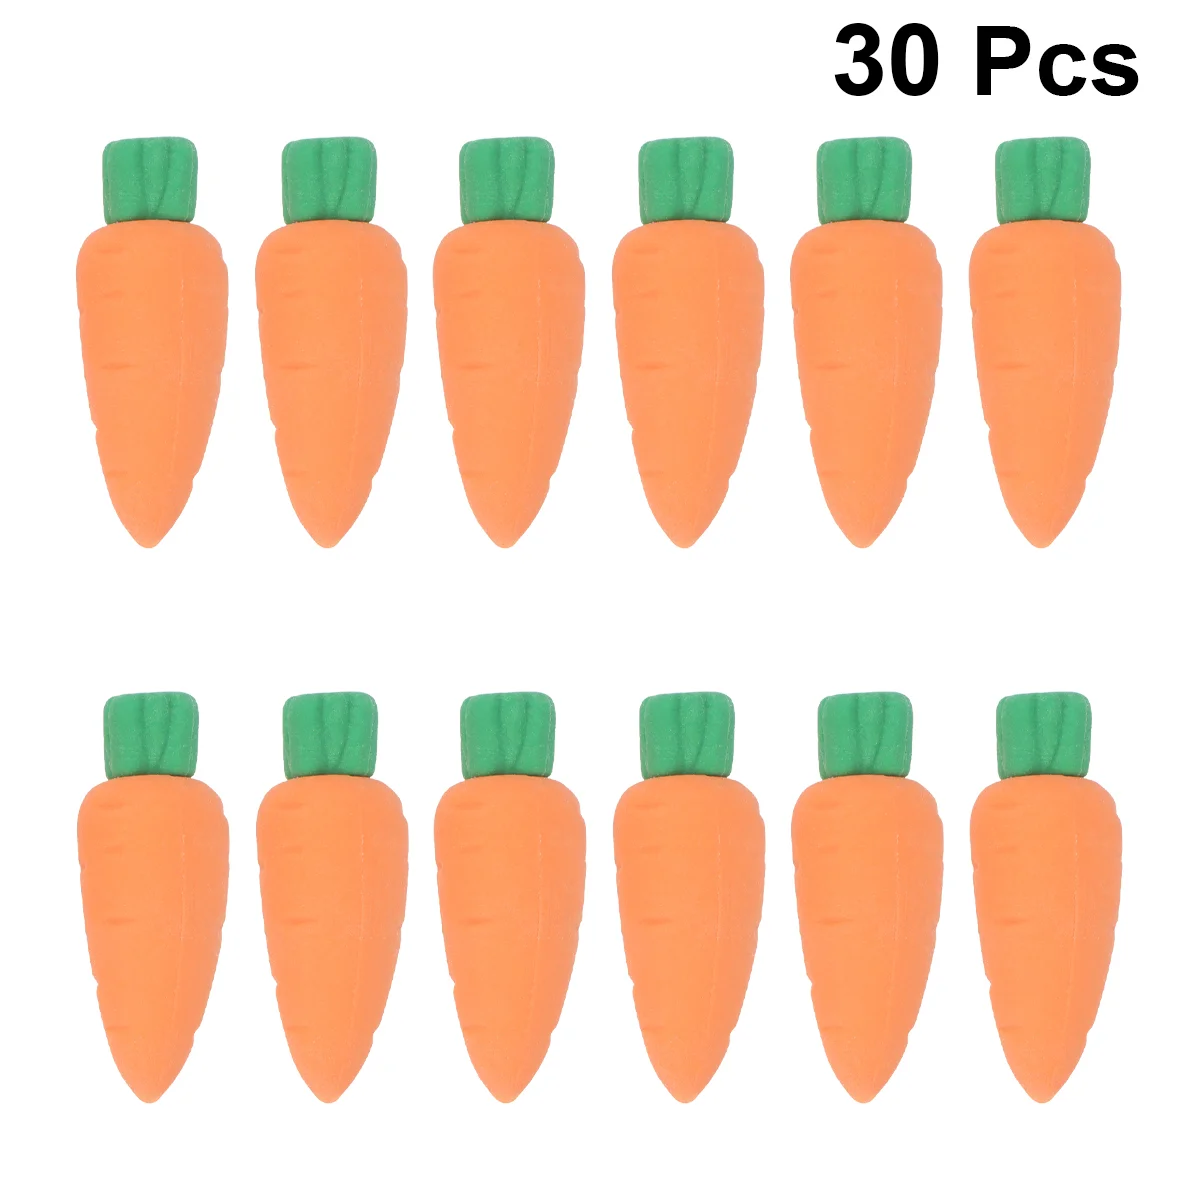 

30pcs Carrot Erasers Rubber Eraser Novelty Easters Party Favors Gifts for Kids Stationery School